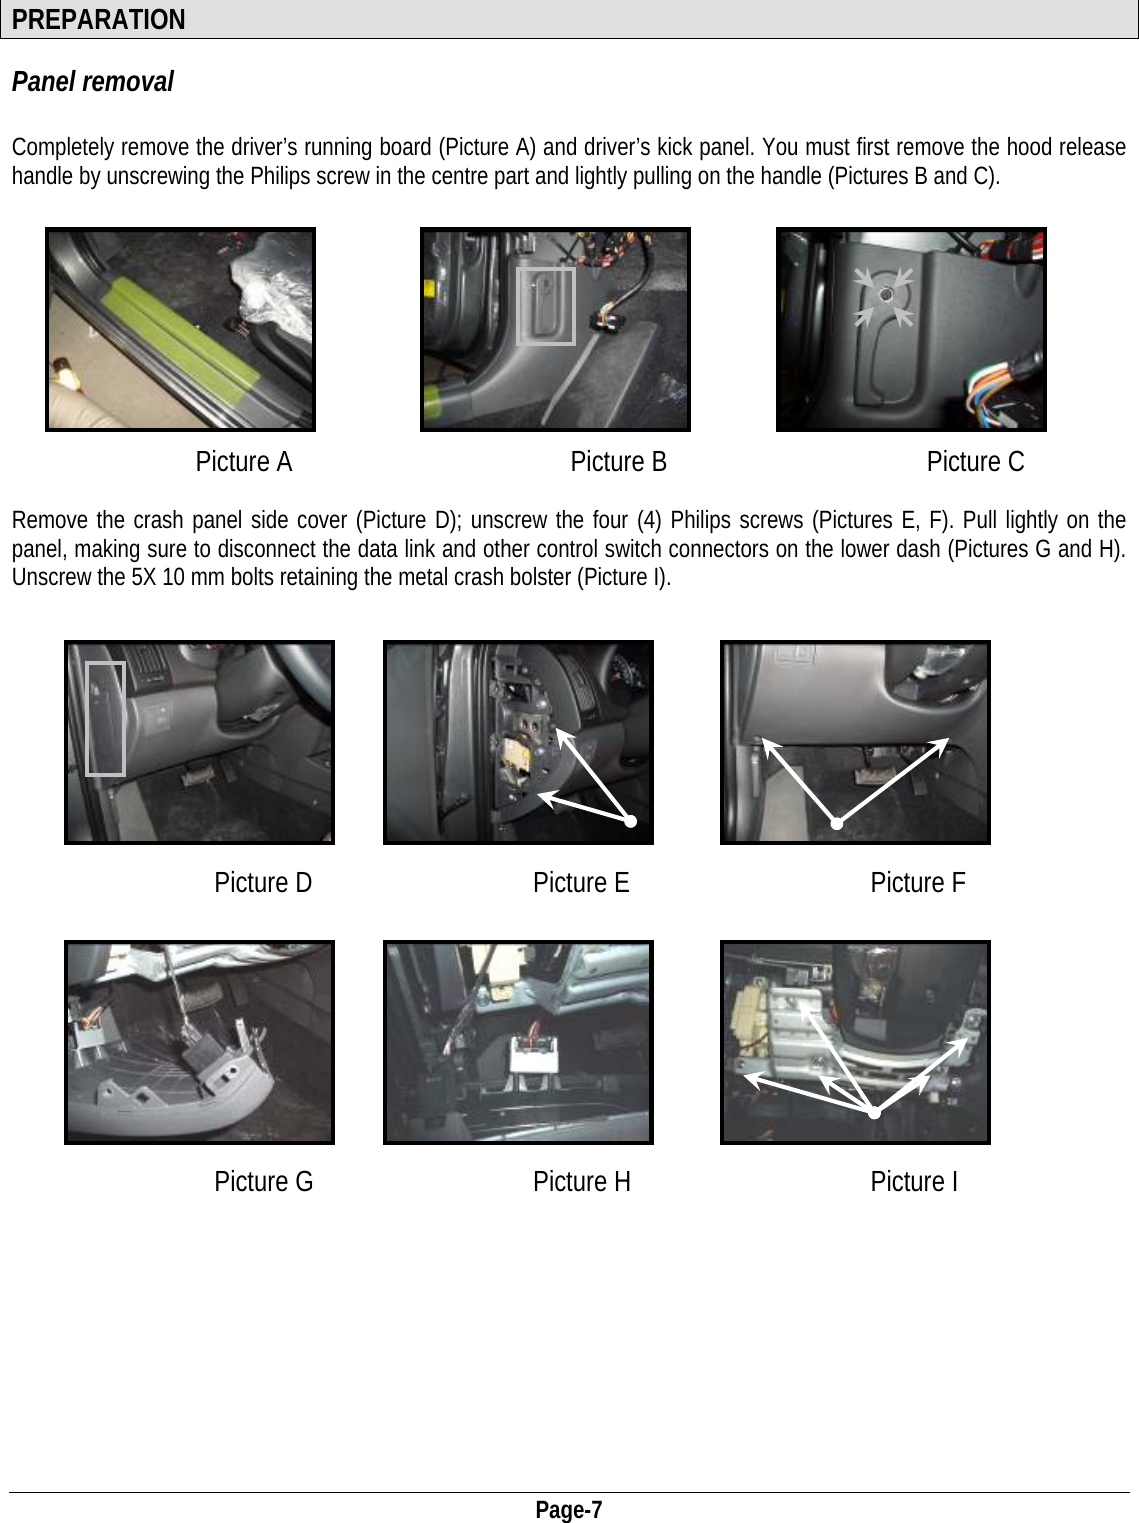  Page-7 PREPARATION Panel removal  Completely remove the driver’s running board (Picture A) and driver’s kick panel. You must first remove the hood release handle by unscrewing the Philips screw in the centre part and lightly pulling on the handle (Pictures B and C).          Picture A  Picture B Picture C   Remove the crash panel side cover (Picture D); unscrew the four (4) Philips screws (Pictures E, F). Pull lightly on the panel, making sure to disconnect the data link and other control switch connectors on the lower dash (Pictures G and H). Unscrew the 5X 10 mm bolts retaining the metal crash bolster (Picture I).           Picture D  Picture E Picture F                                                           Picture G  Picture H Picture I     